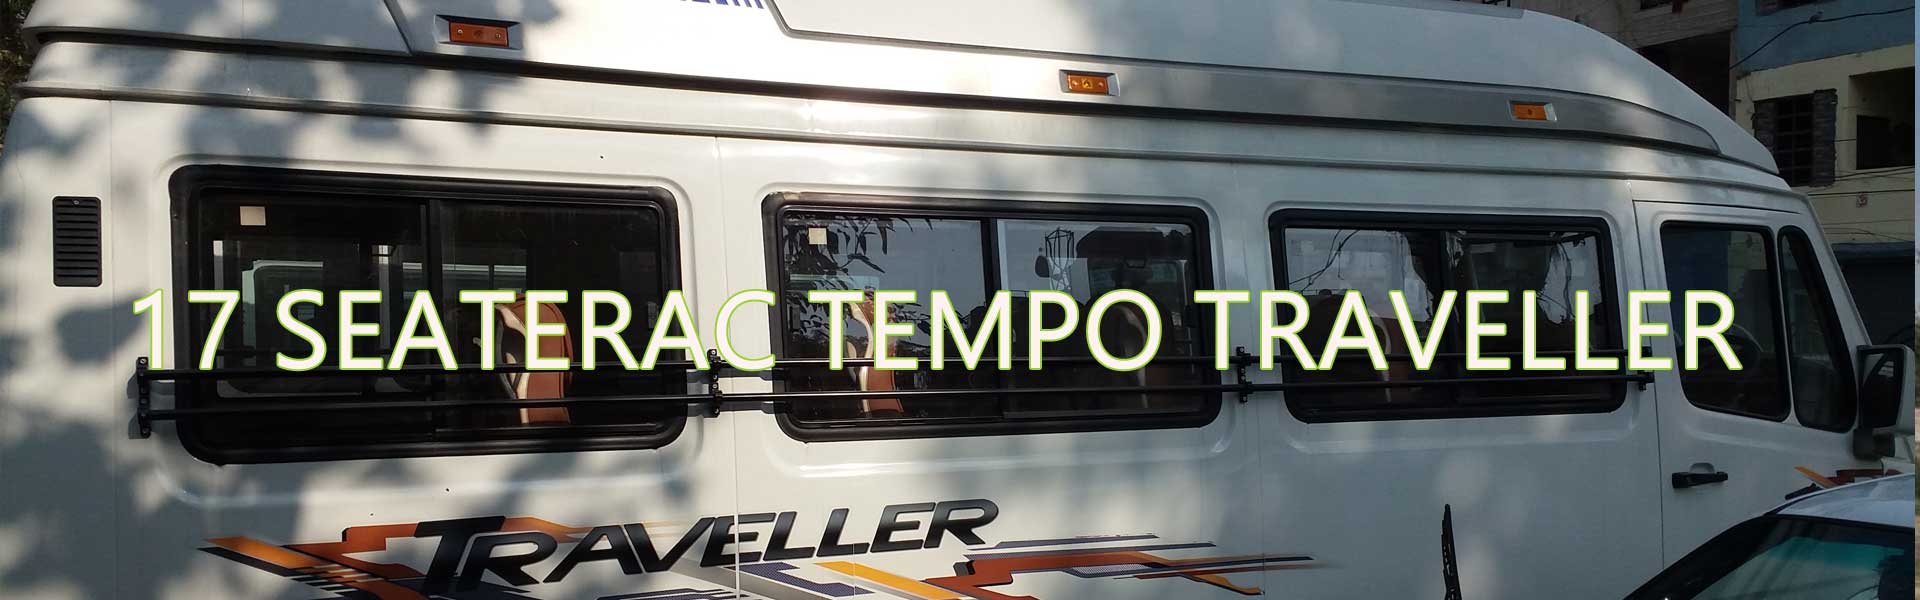 17 seater ac tempo traveller hire in hyderabad